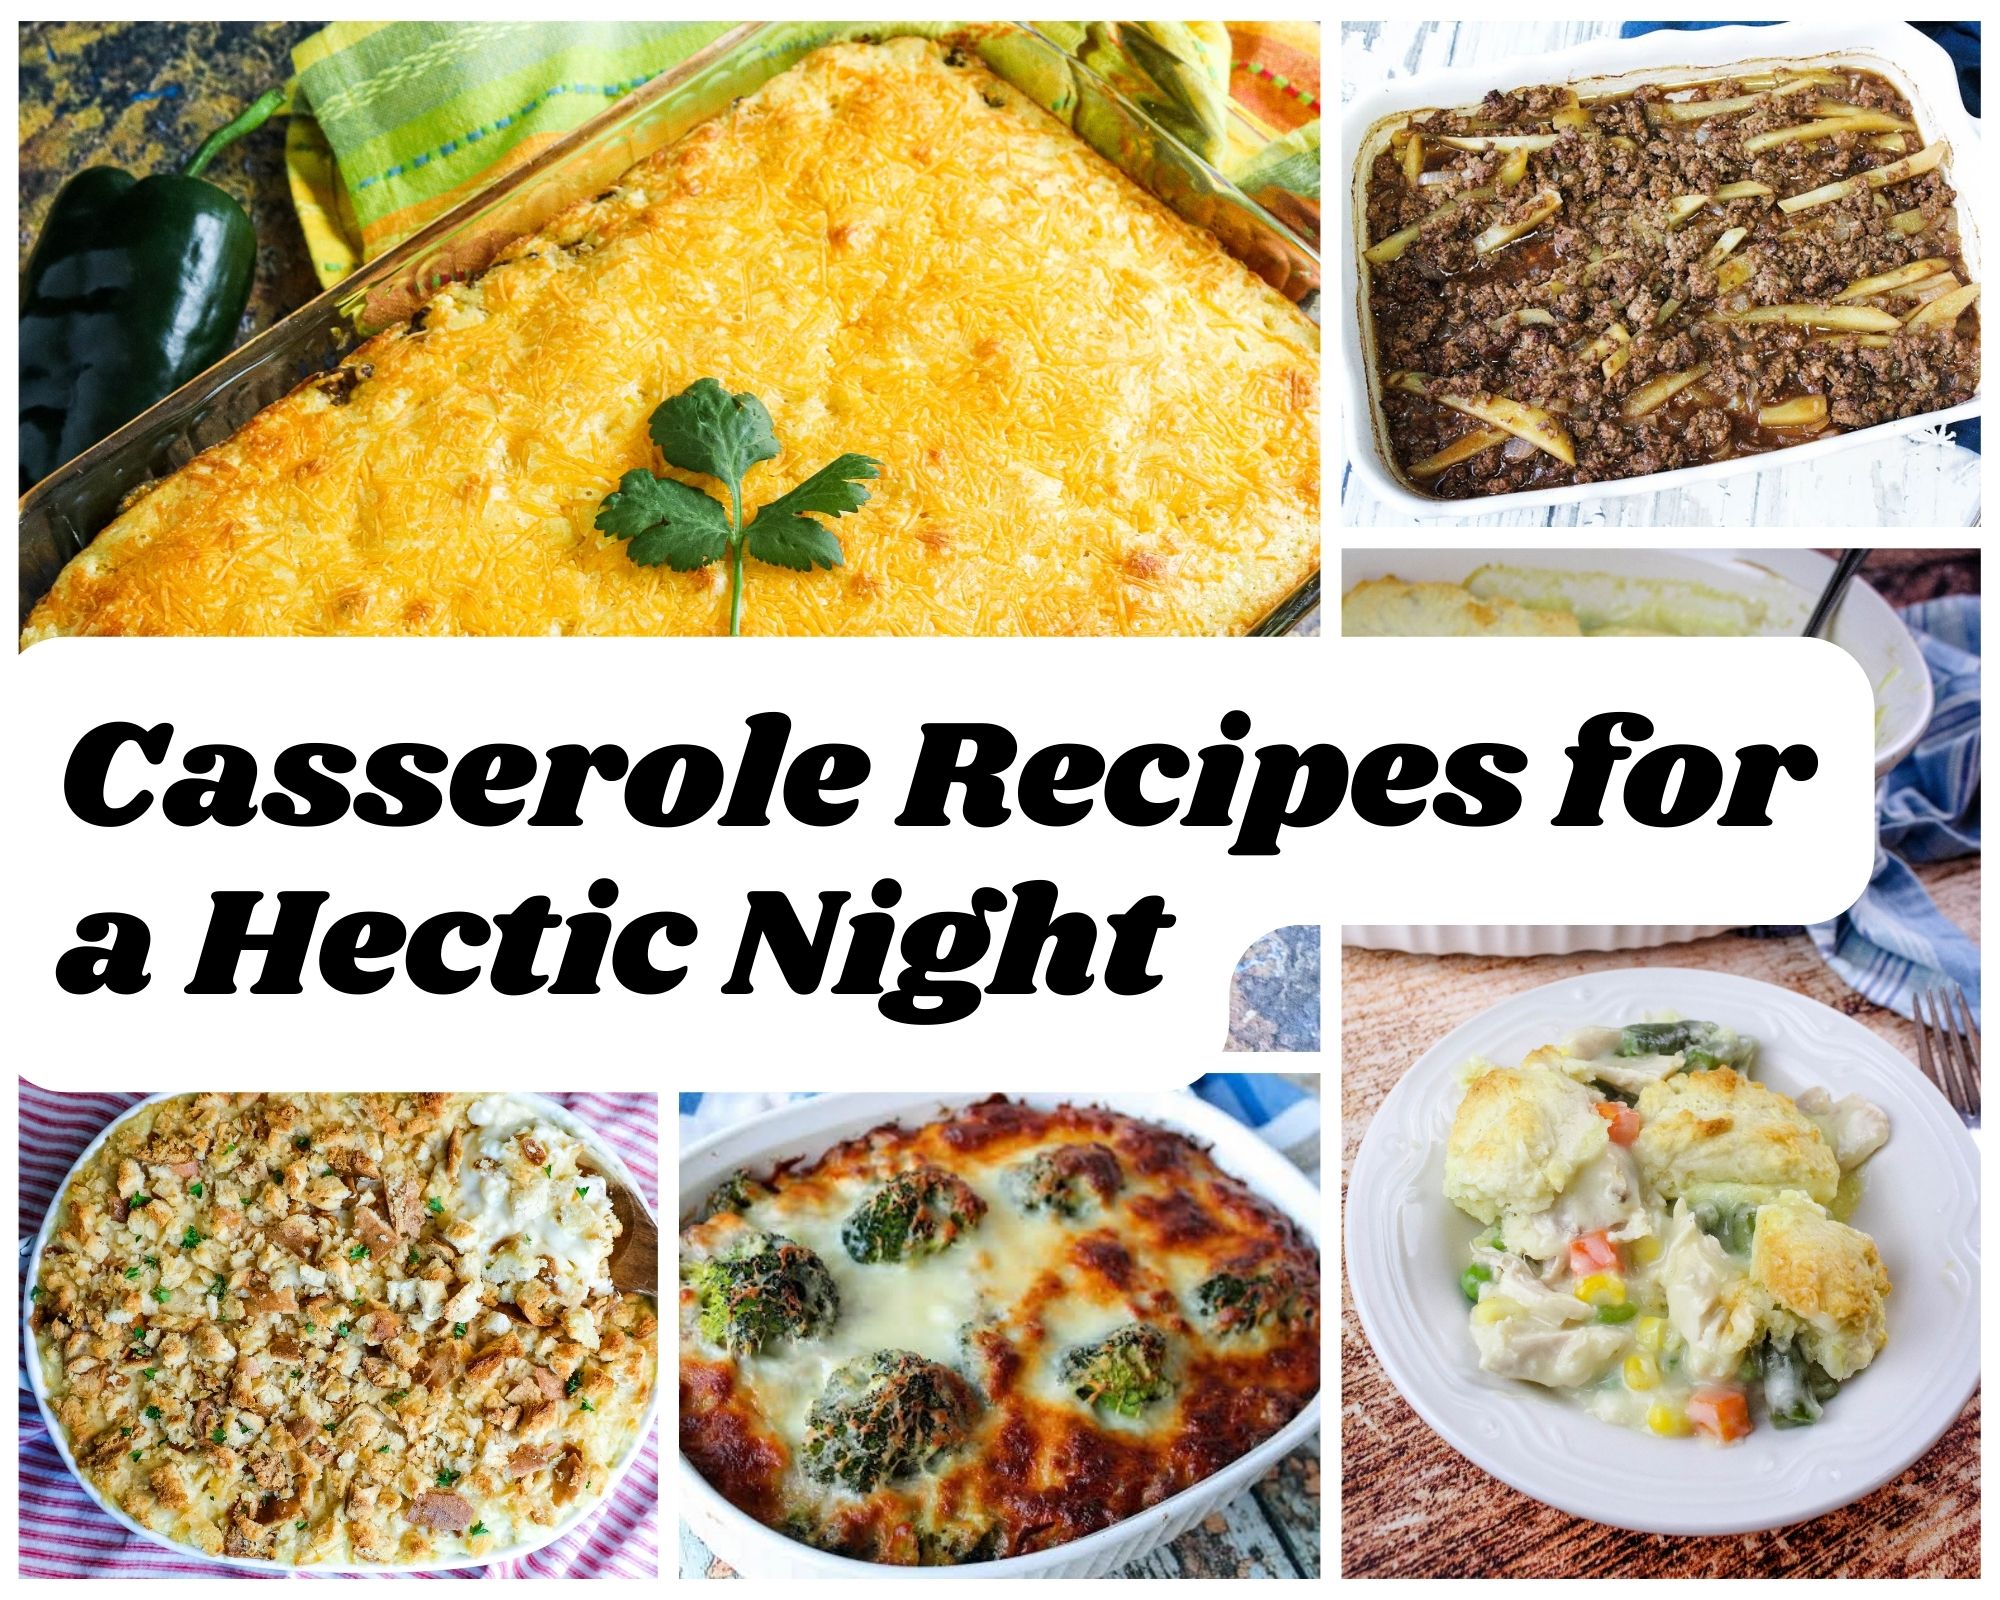 Casserole Recipes for a Hectic Night